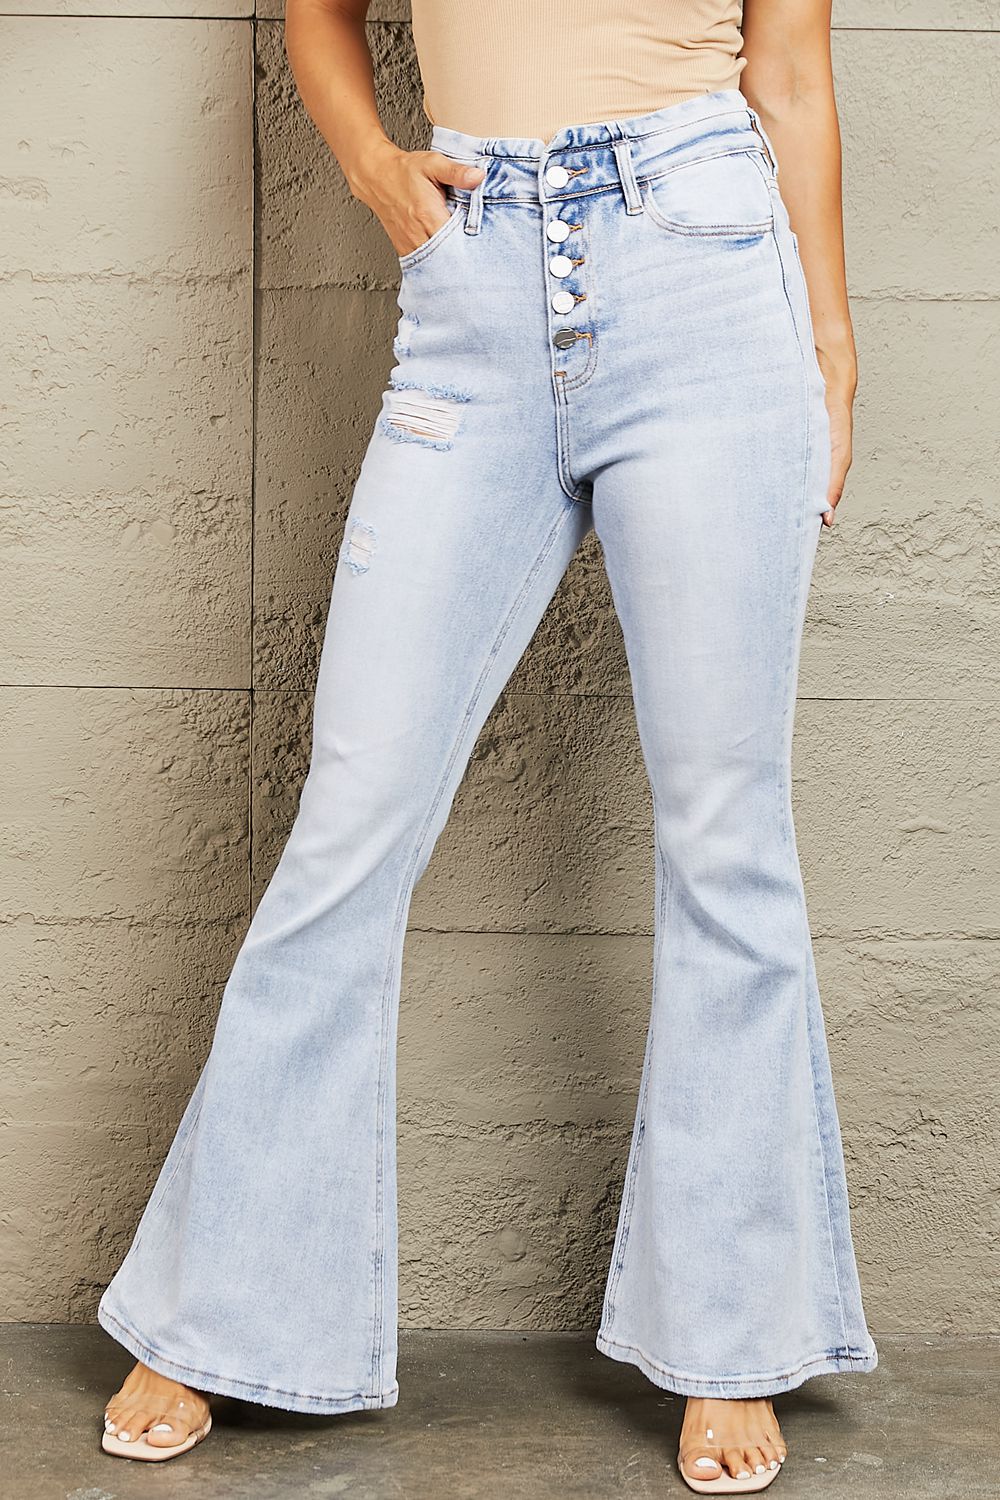 High Waisted Button Fly Flare Light Blue Jeans - Tigbul's Fashion